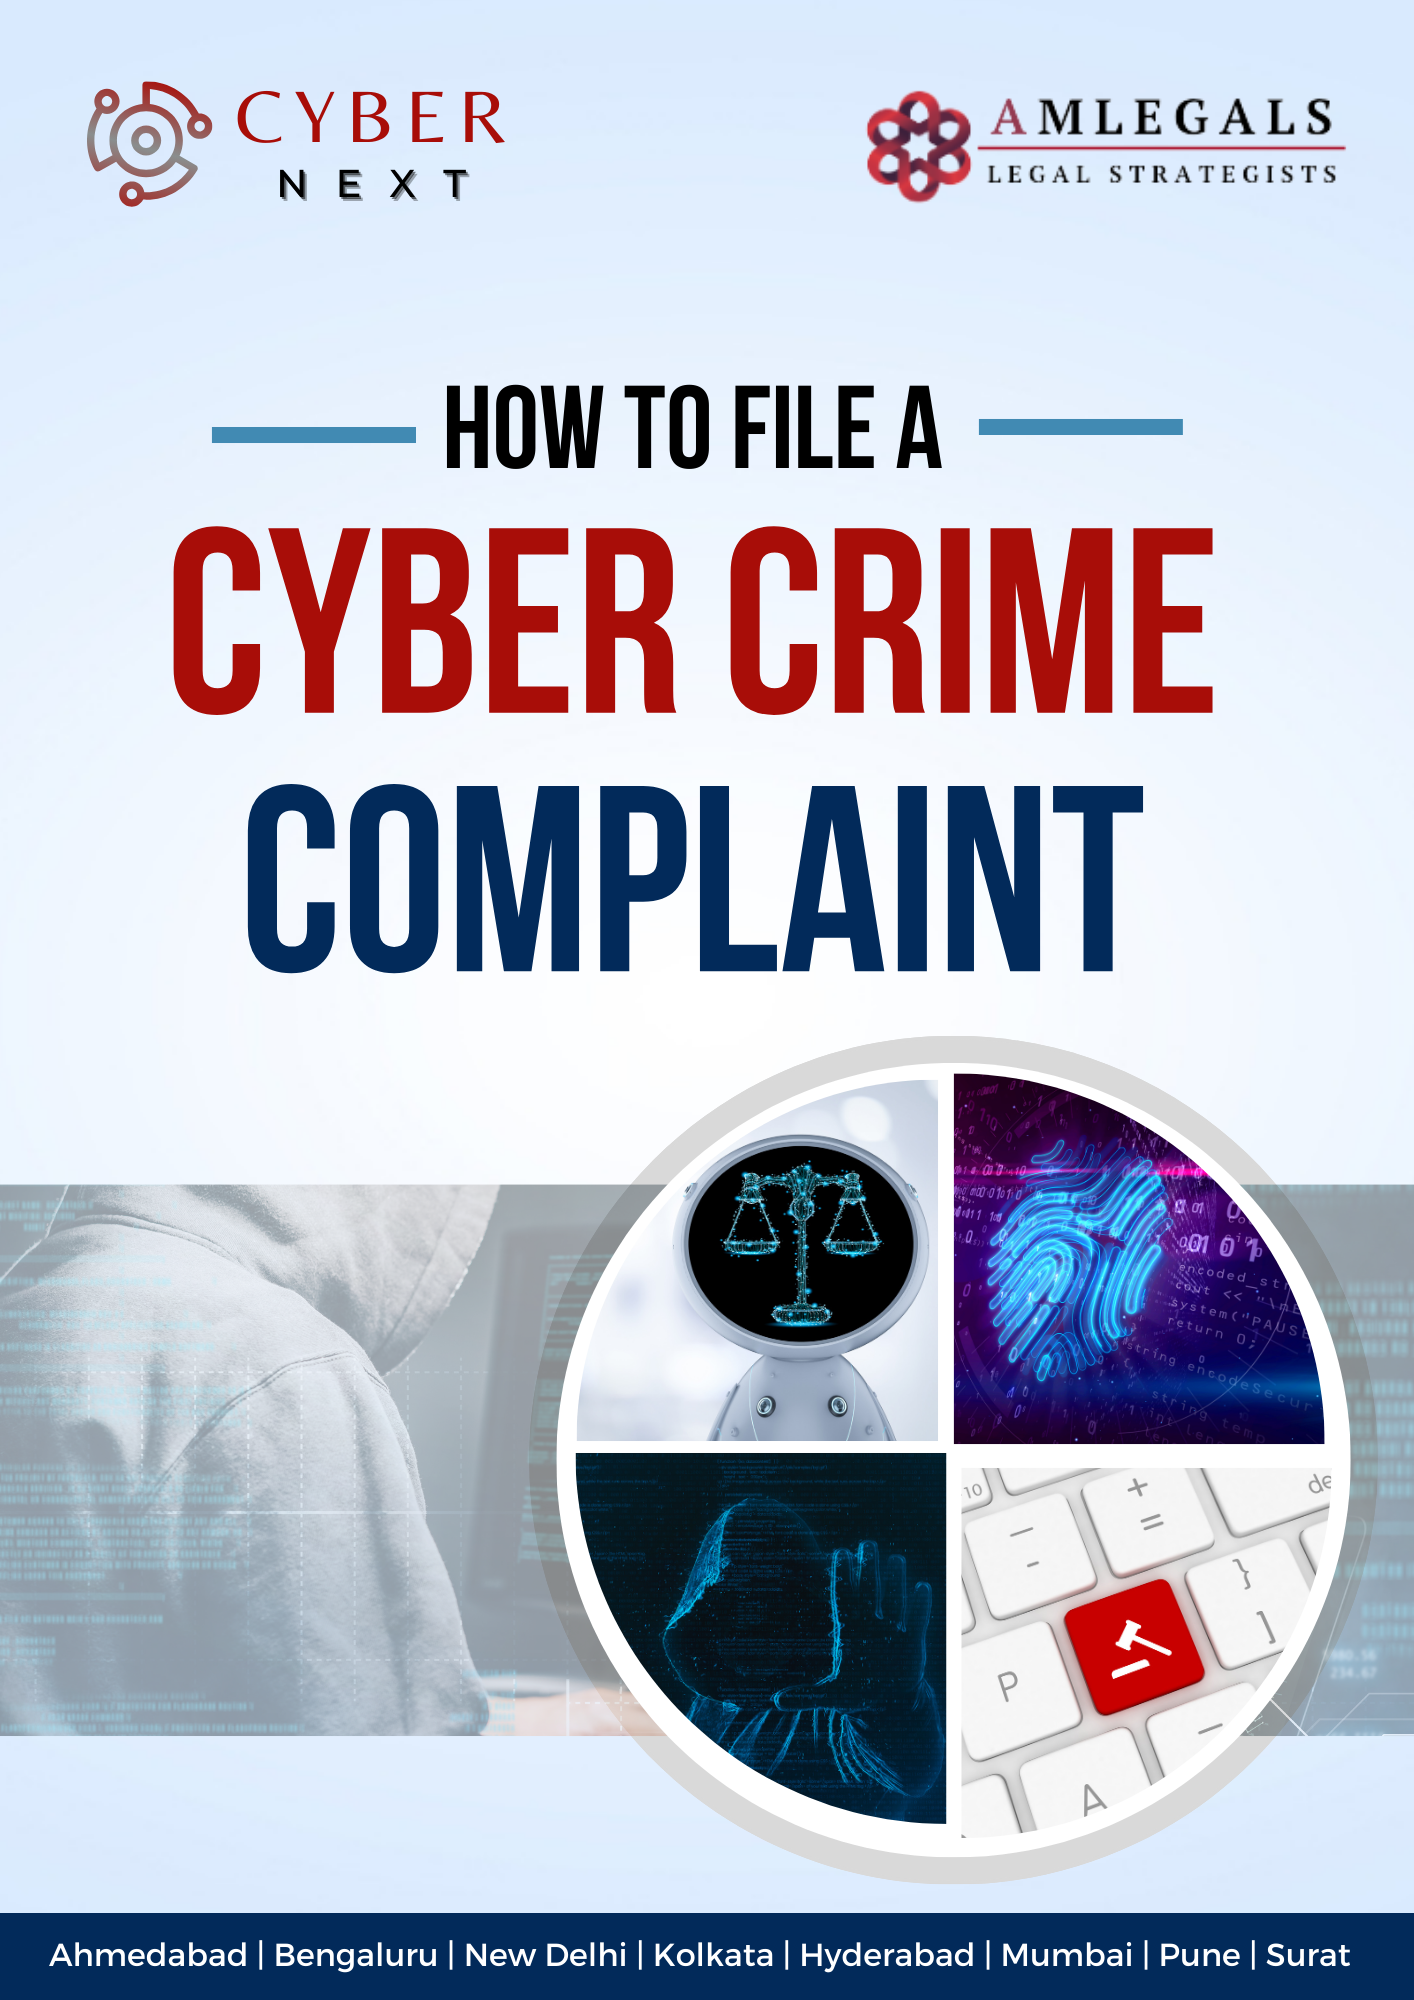 How to file a Cyber Crime Complaint